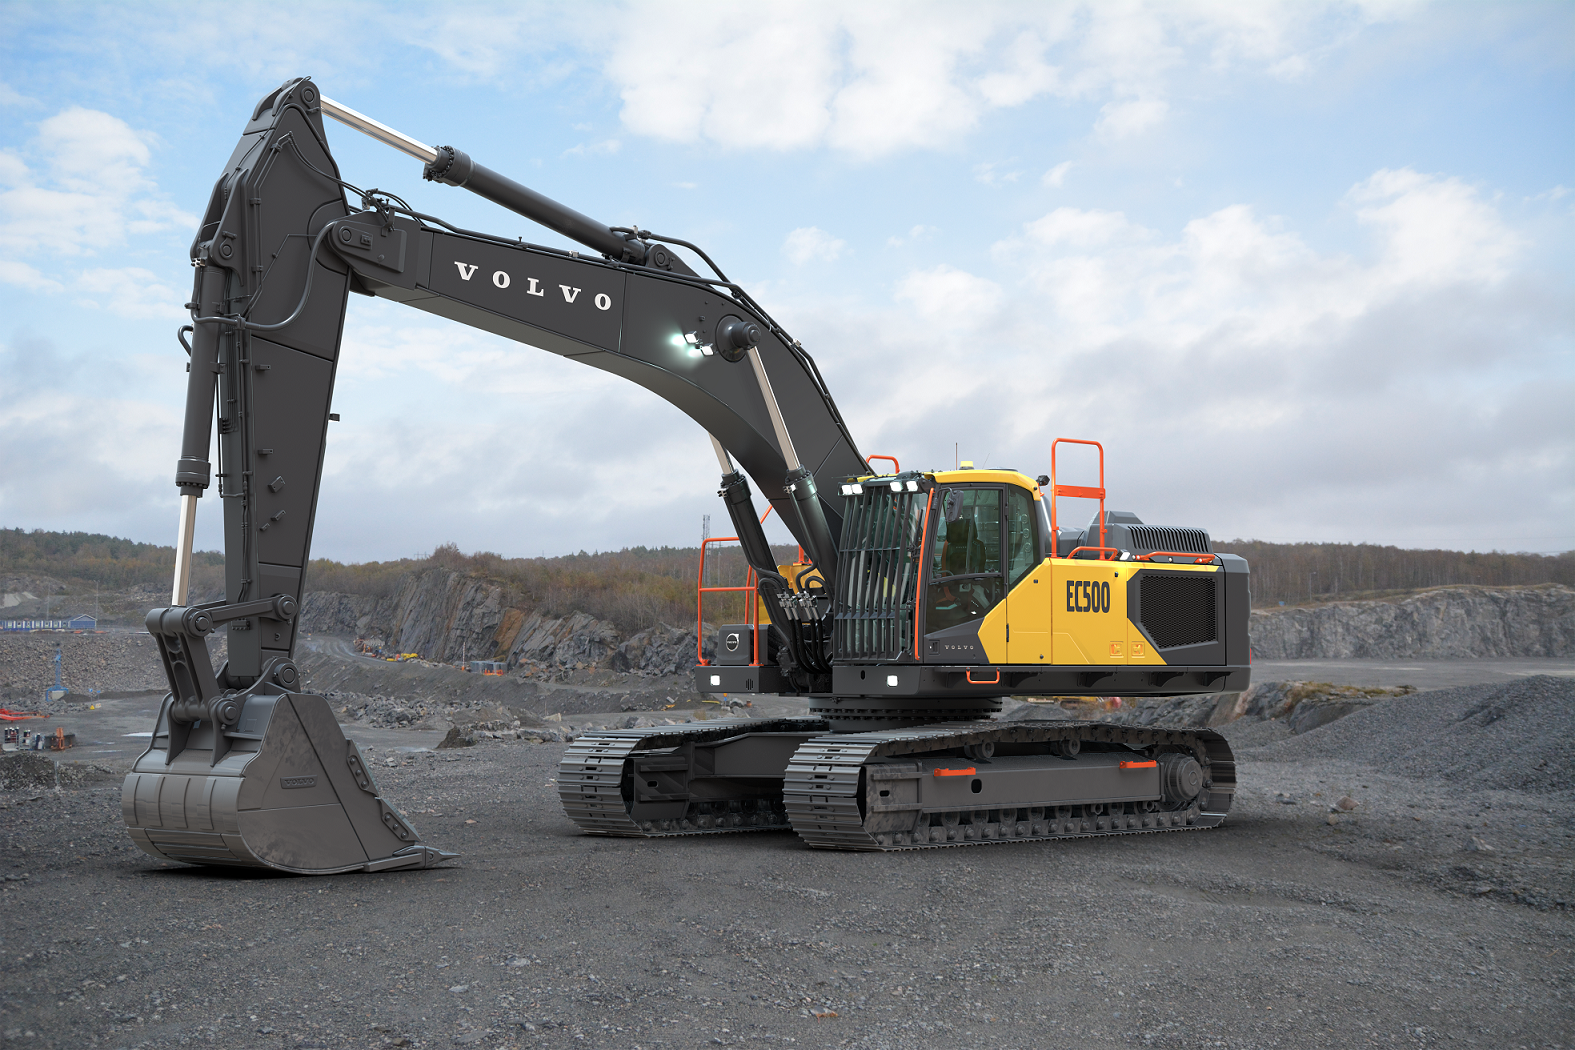 The EC500 excavator is fitted with Volvo Smart View with Obstacle Detection